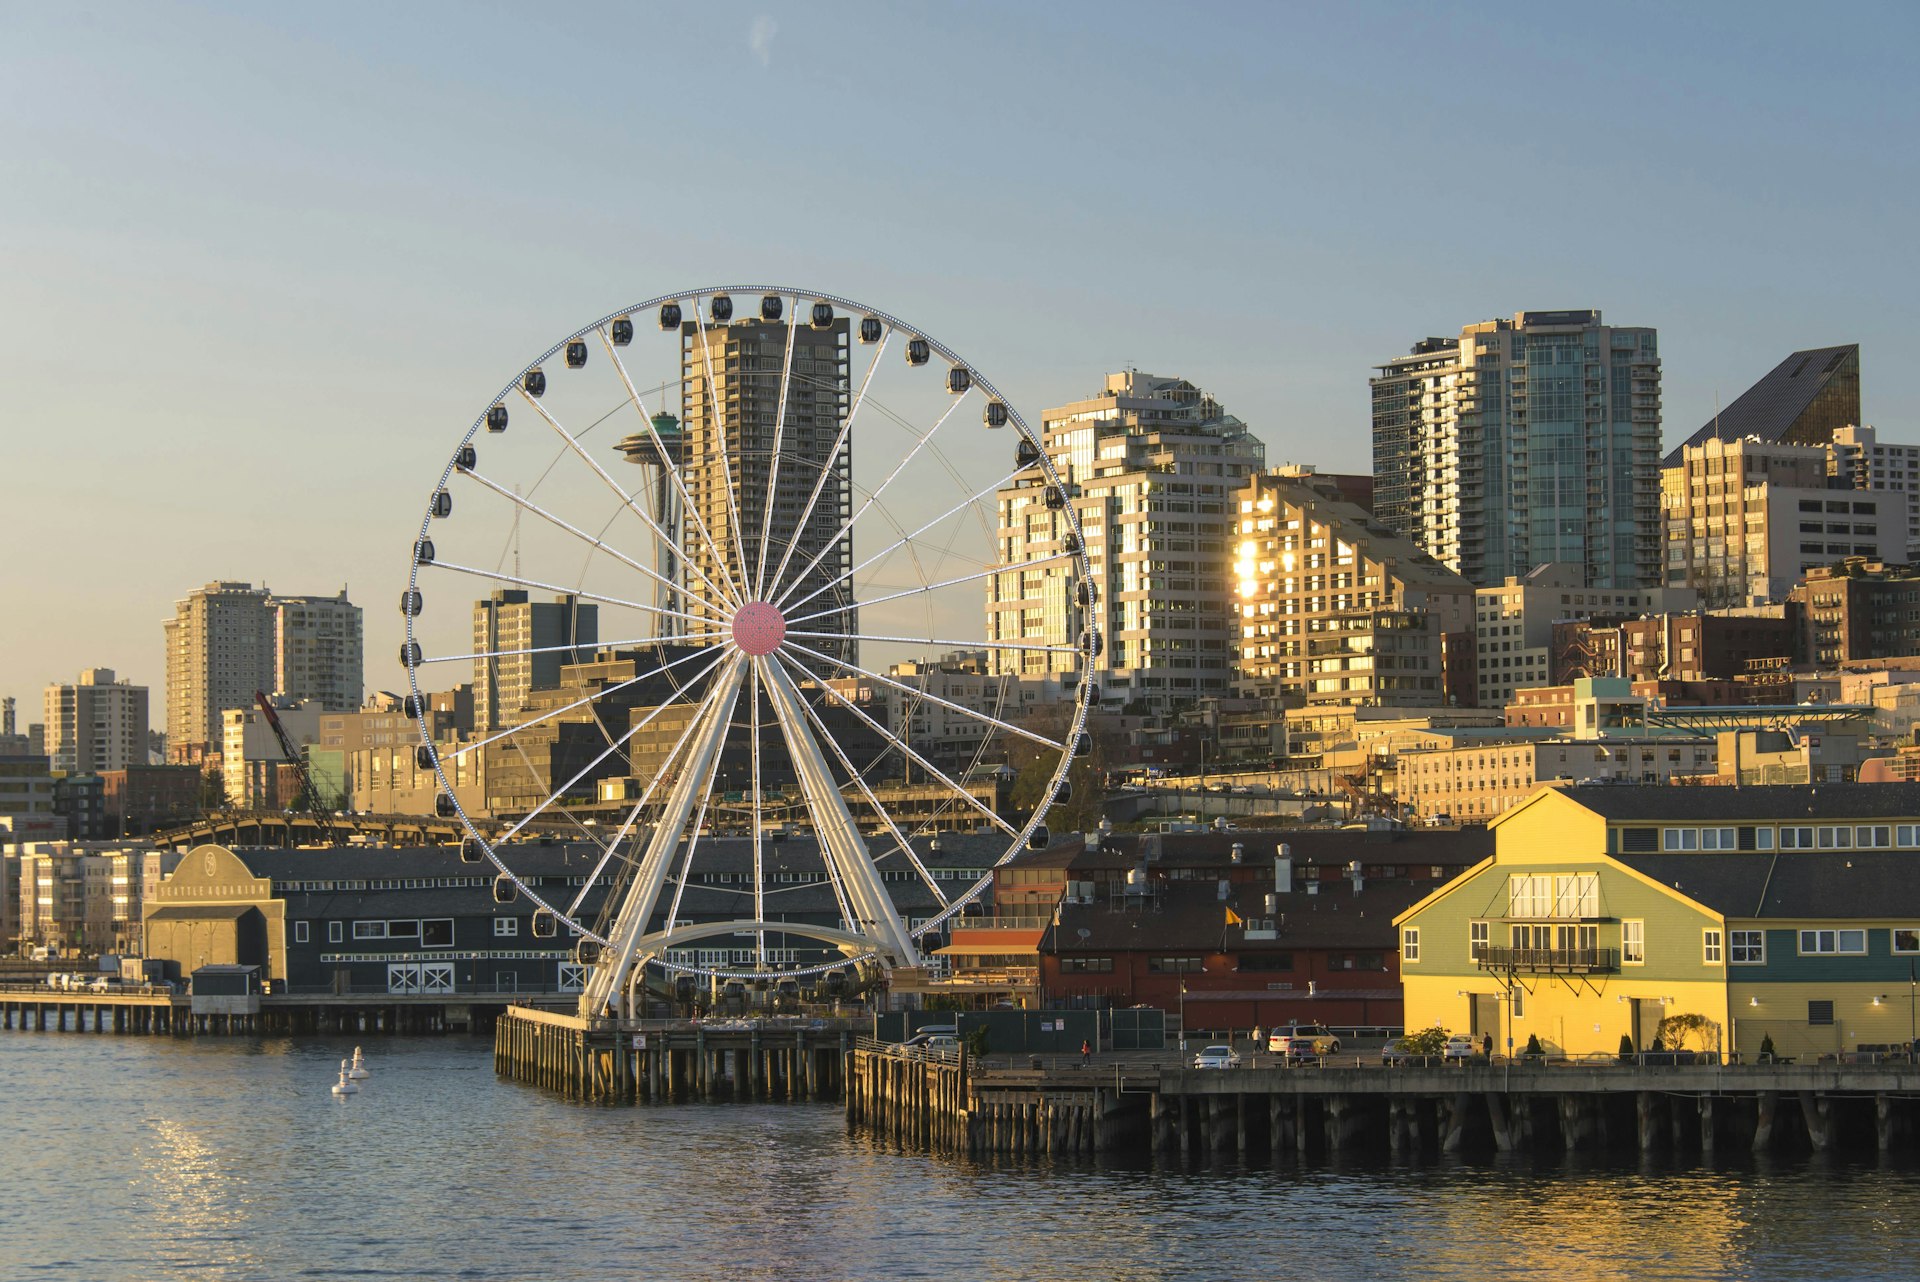 The Seattle Great Wheel at Pier 57. Image by Danita Delimont / Gallo Images / Getty